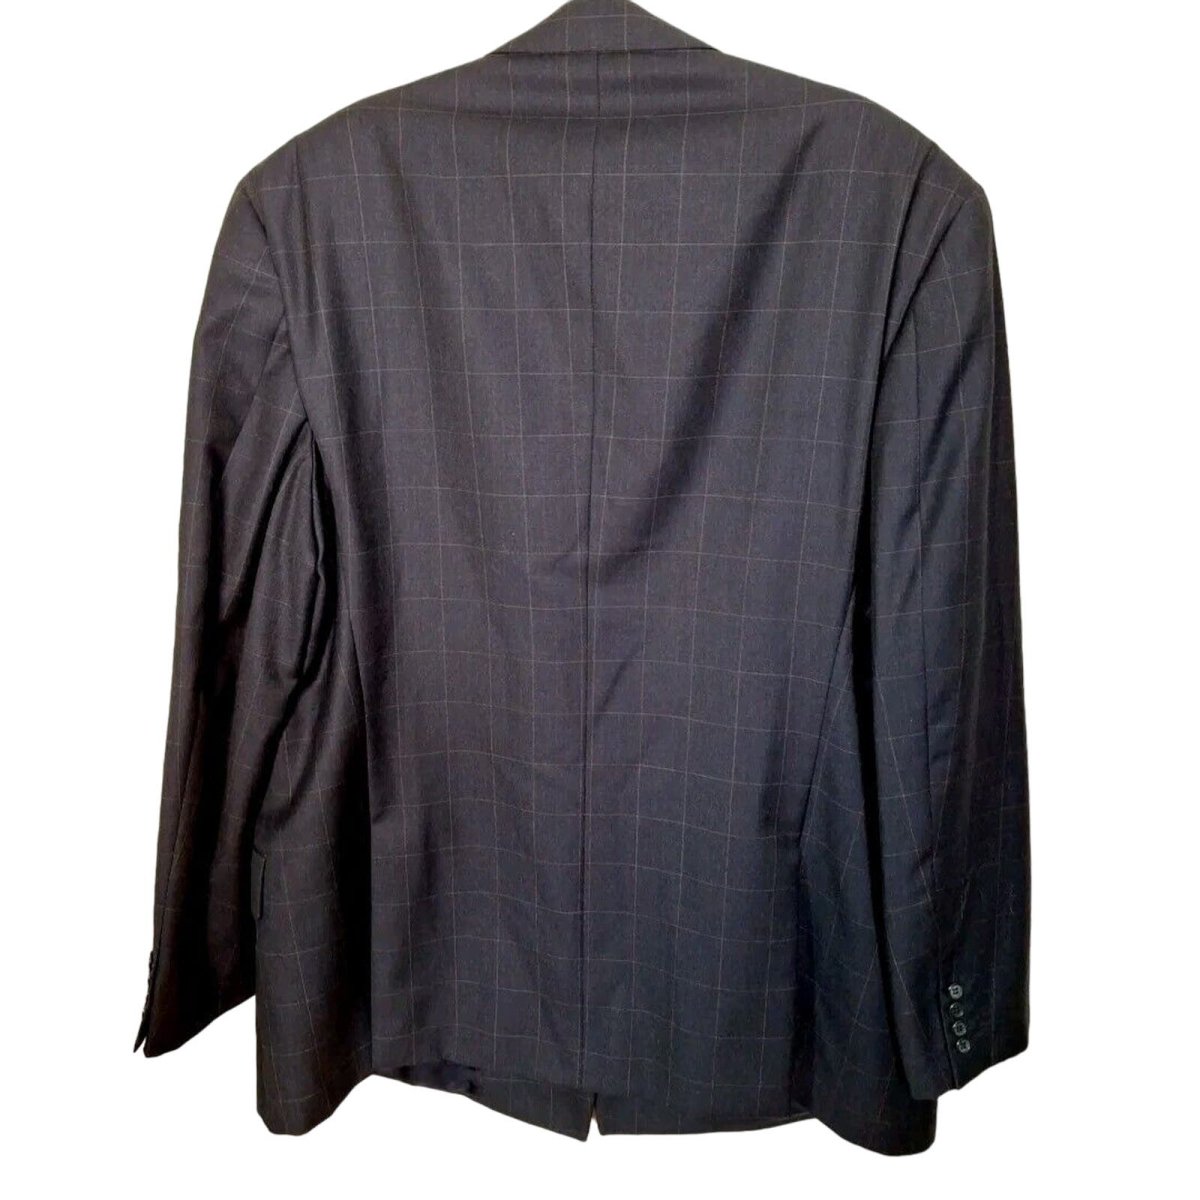 Vintage Valentino Windowpane Double Breasted Blazer Jacket Men Size 48L Women 2X - themallvintage The Mall Vintage 1990s Business Casual Corpcore